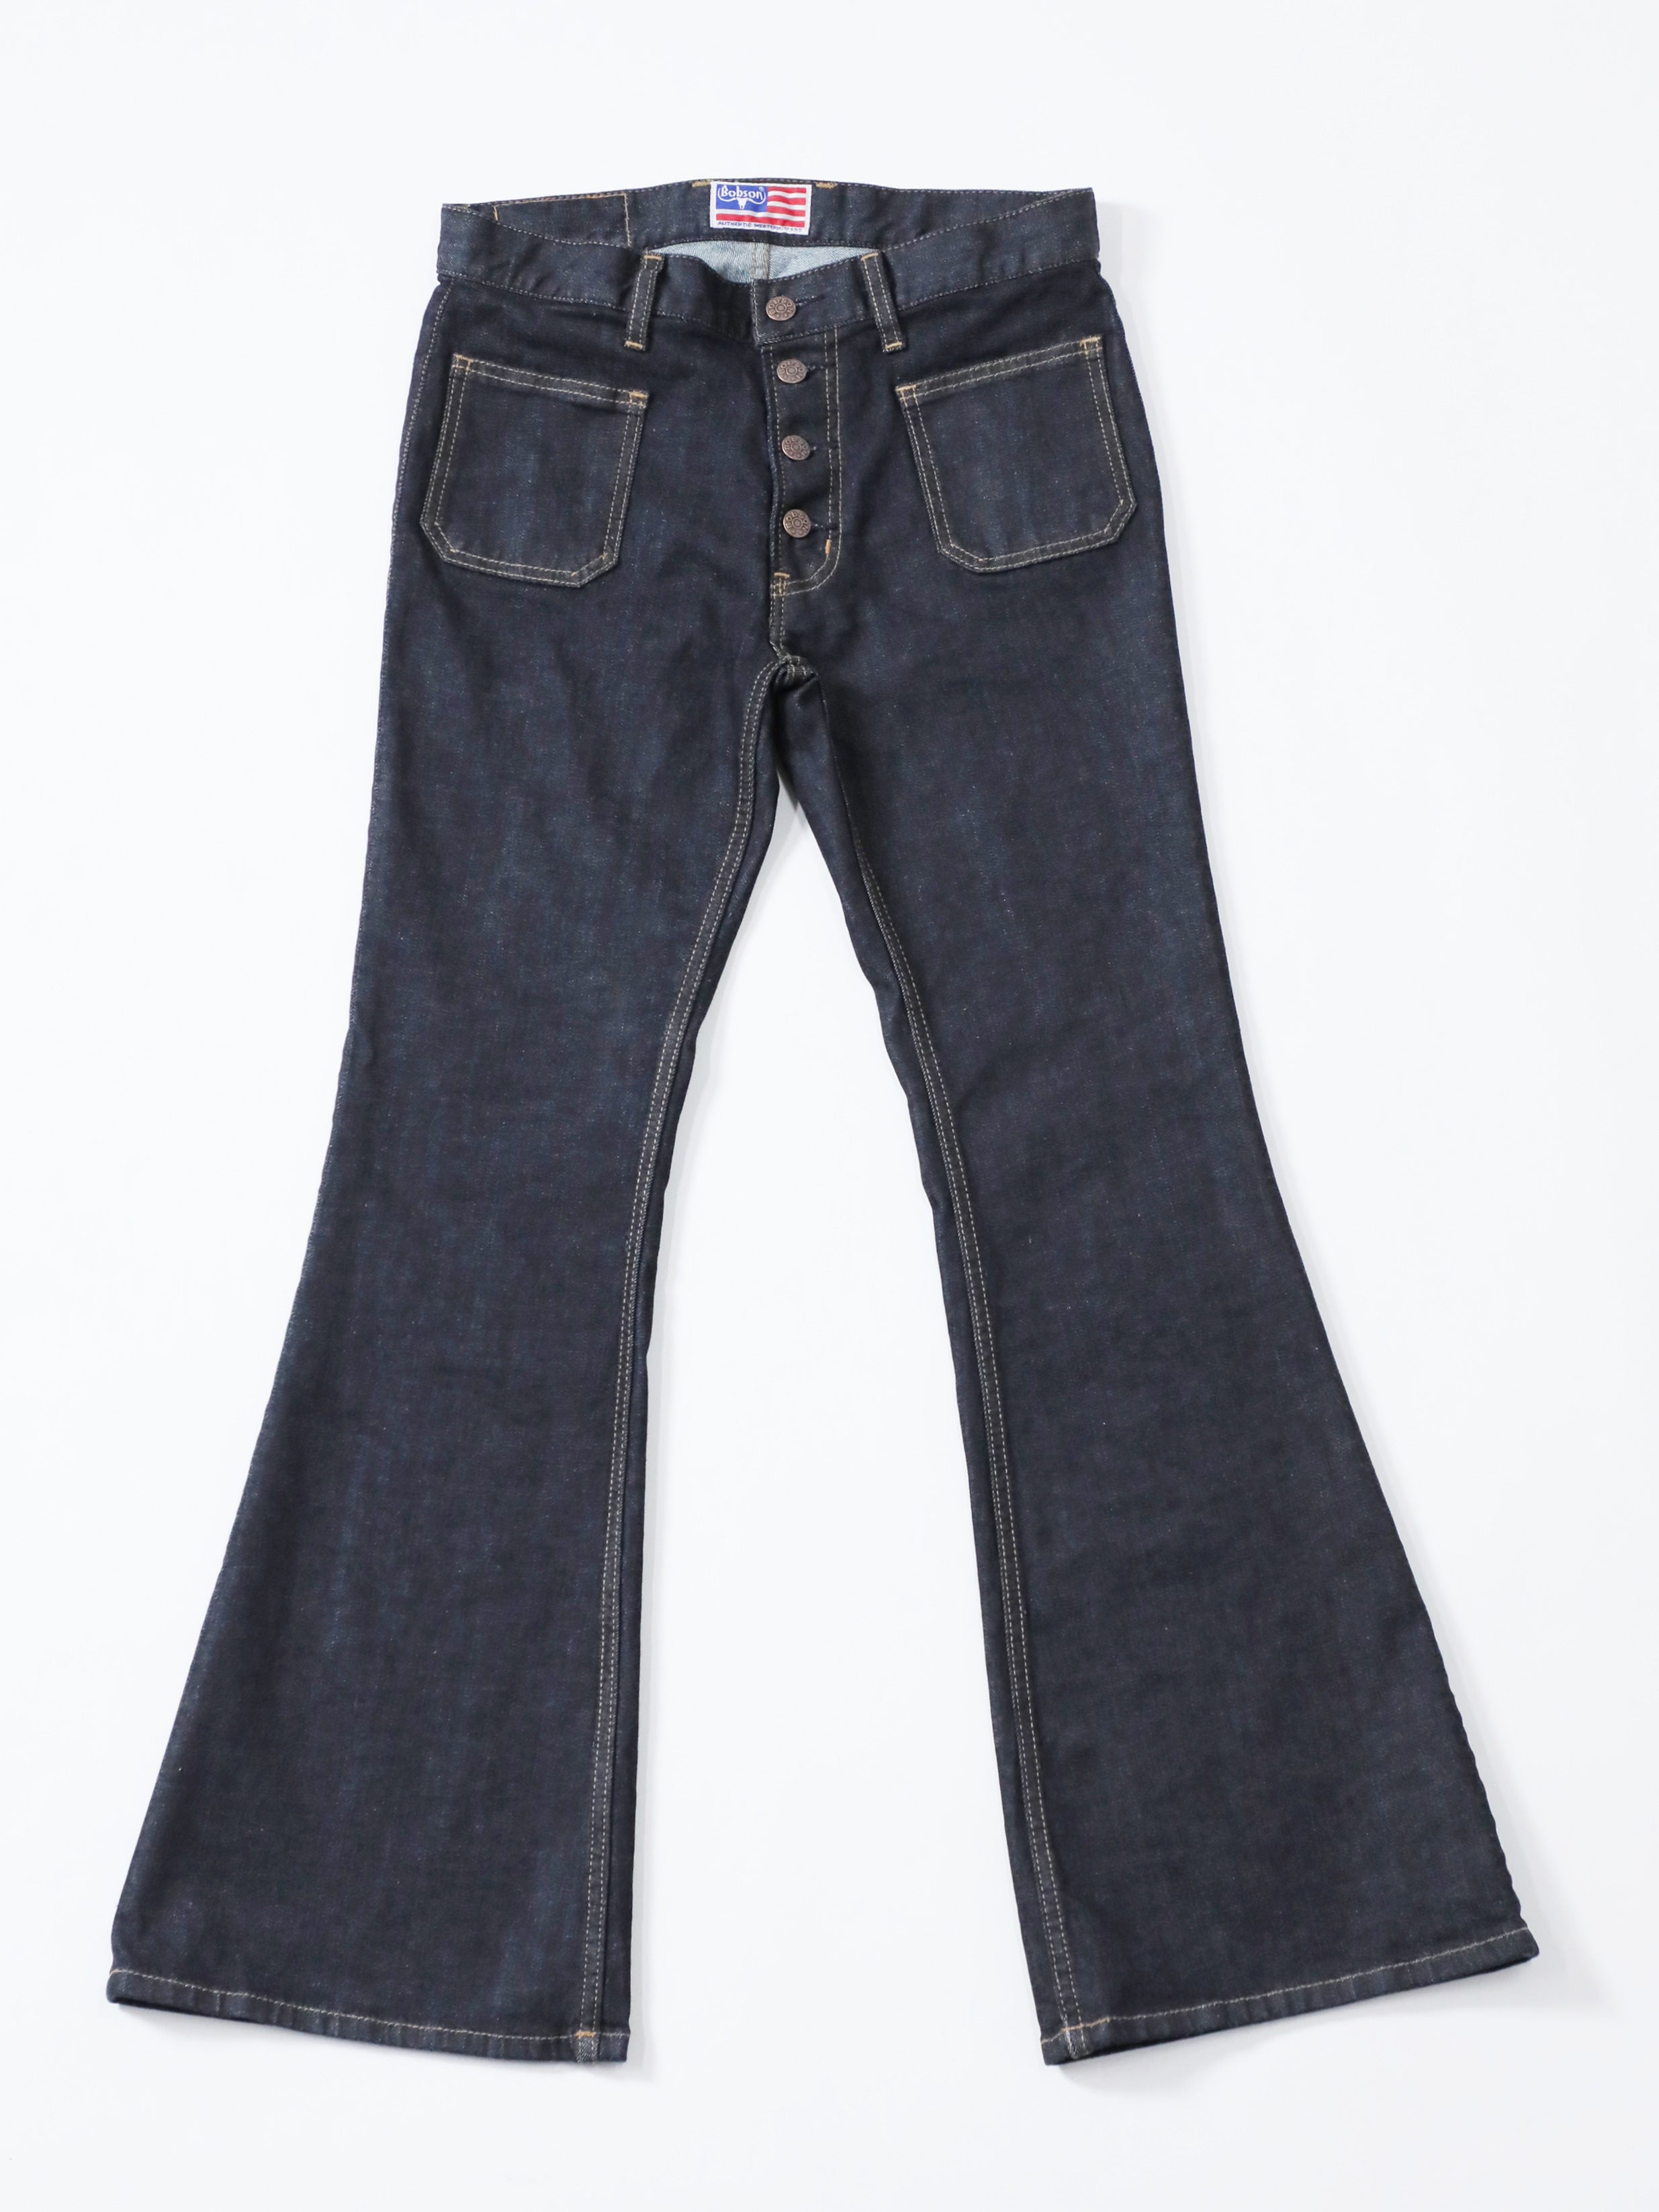 Patch Pocket Bell Bottom Jeans Type 550 Reproduction One Wash 